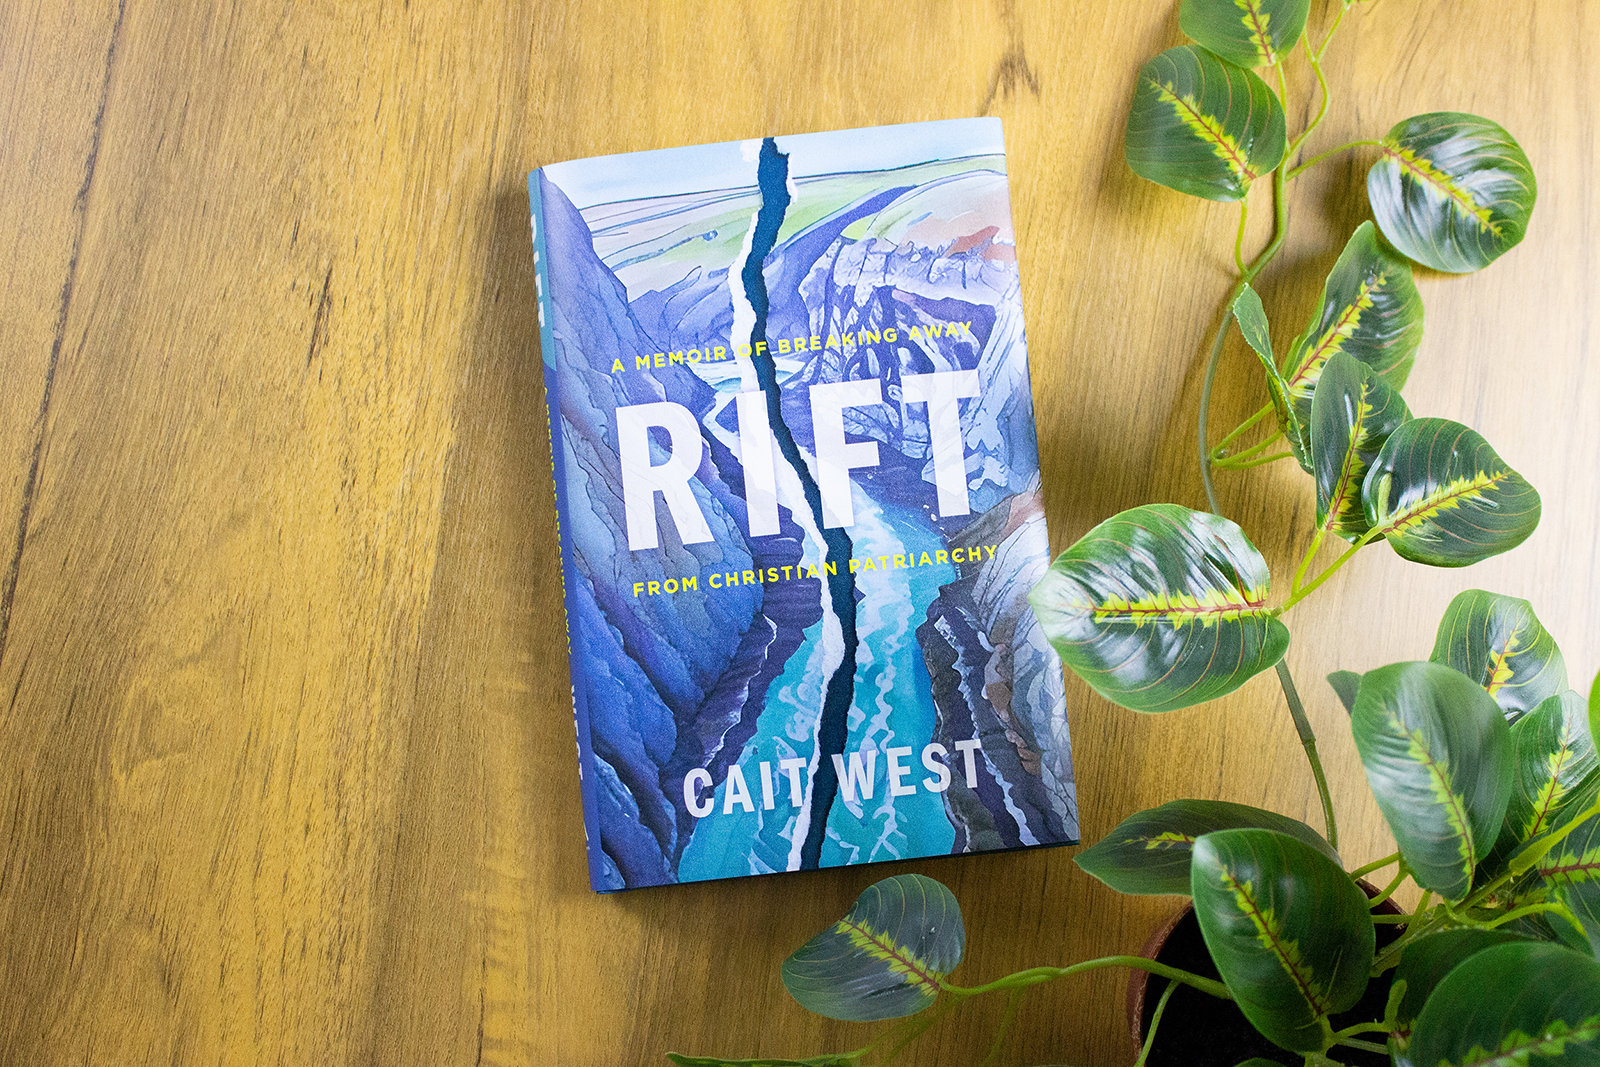 “Rift: A Memoir of Breaking Away from Christian Patriarchy" by Cait West. (Courtesy image)